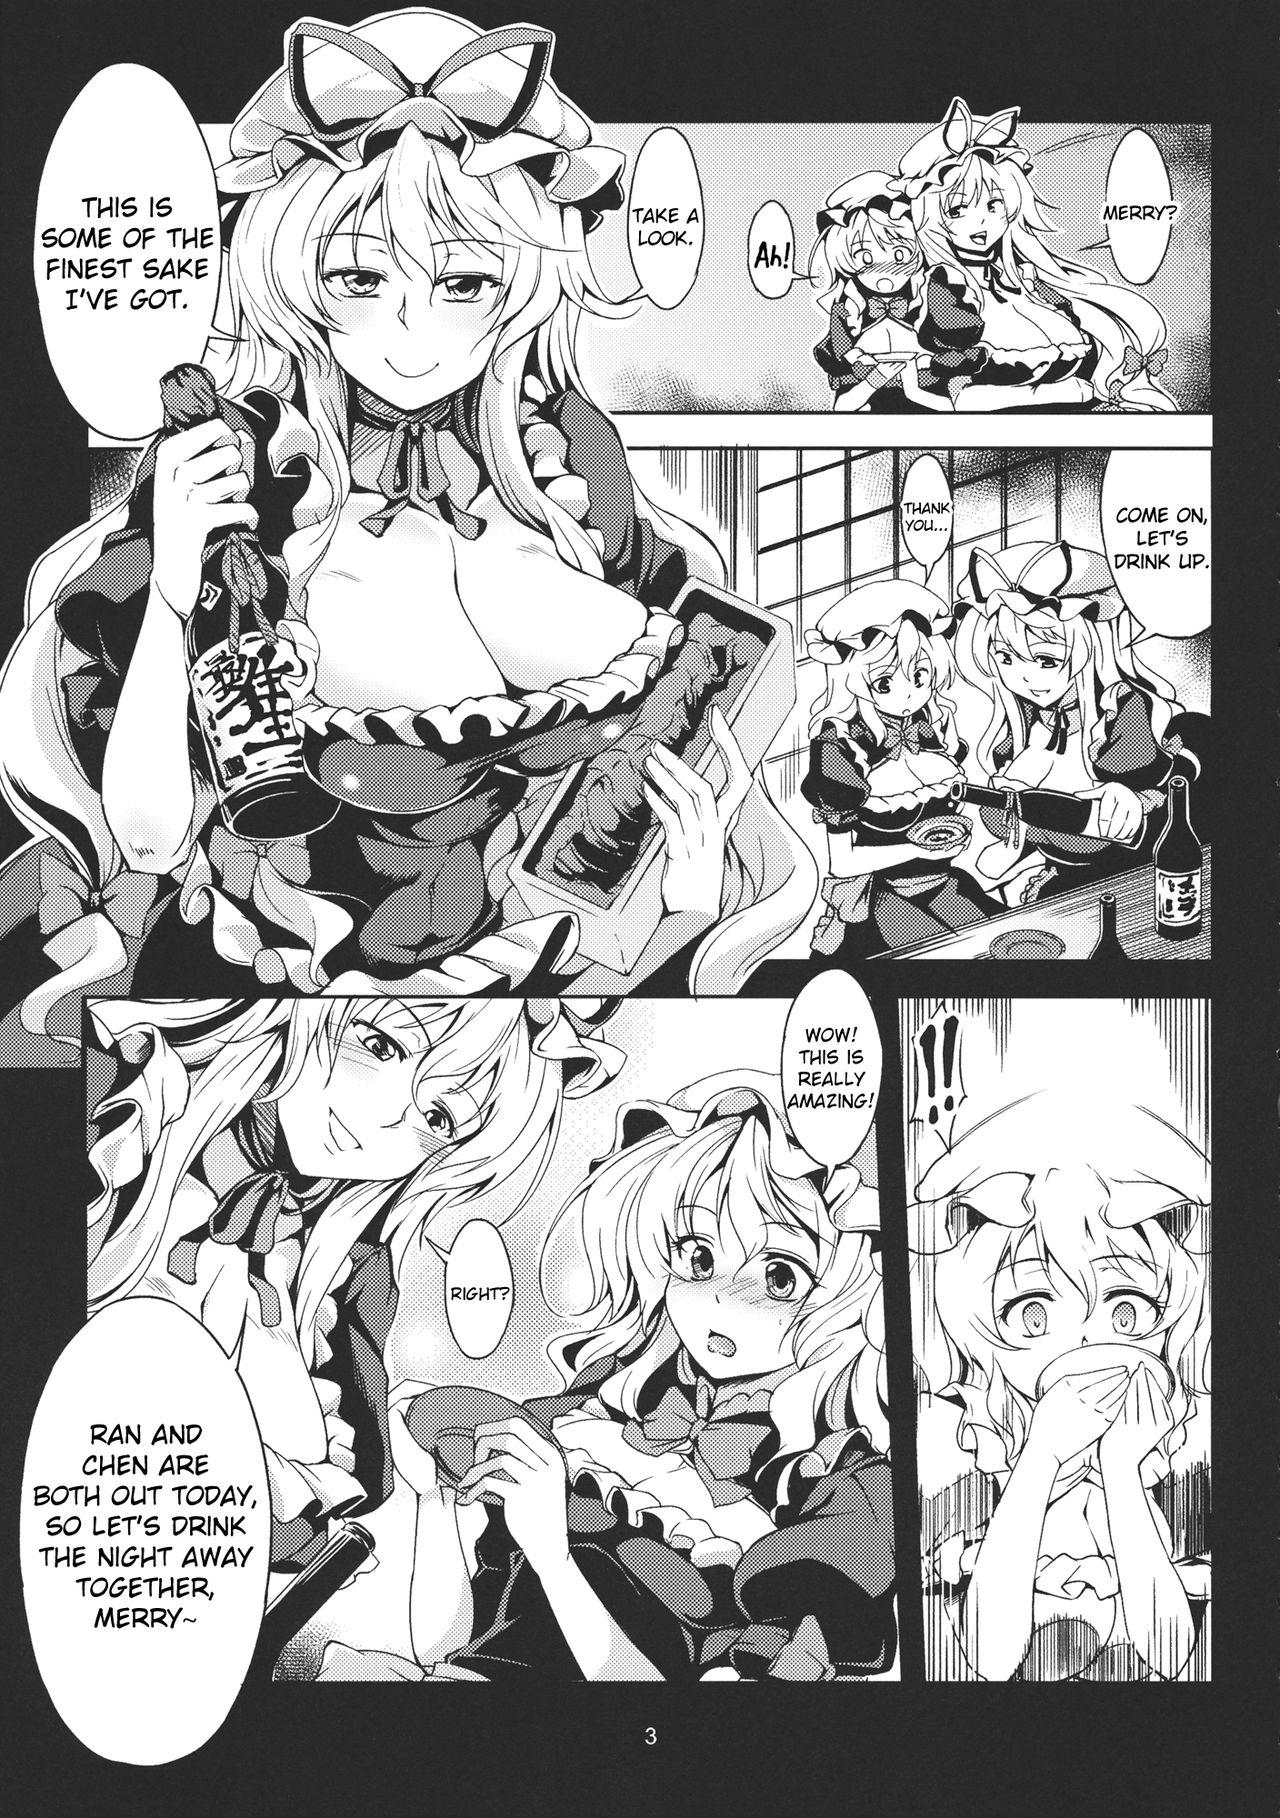 Amateurs Gone Lunatic Banquet - Touhou project Reversecowgirl - Page 6